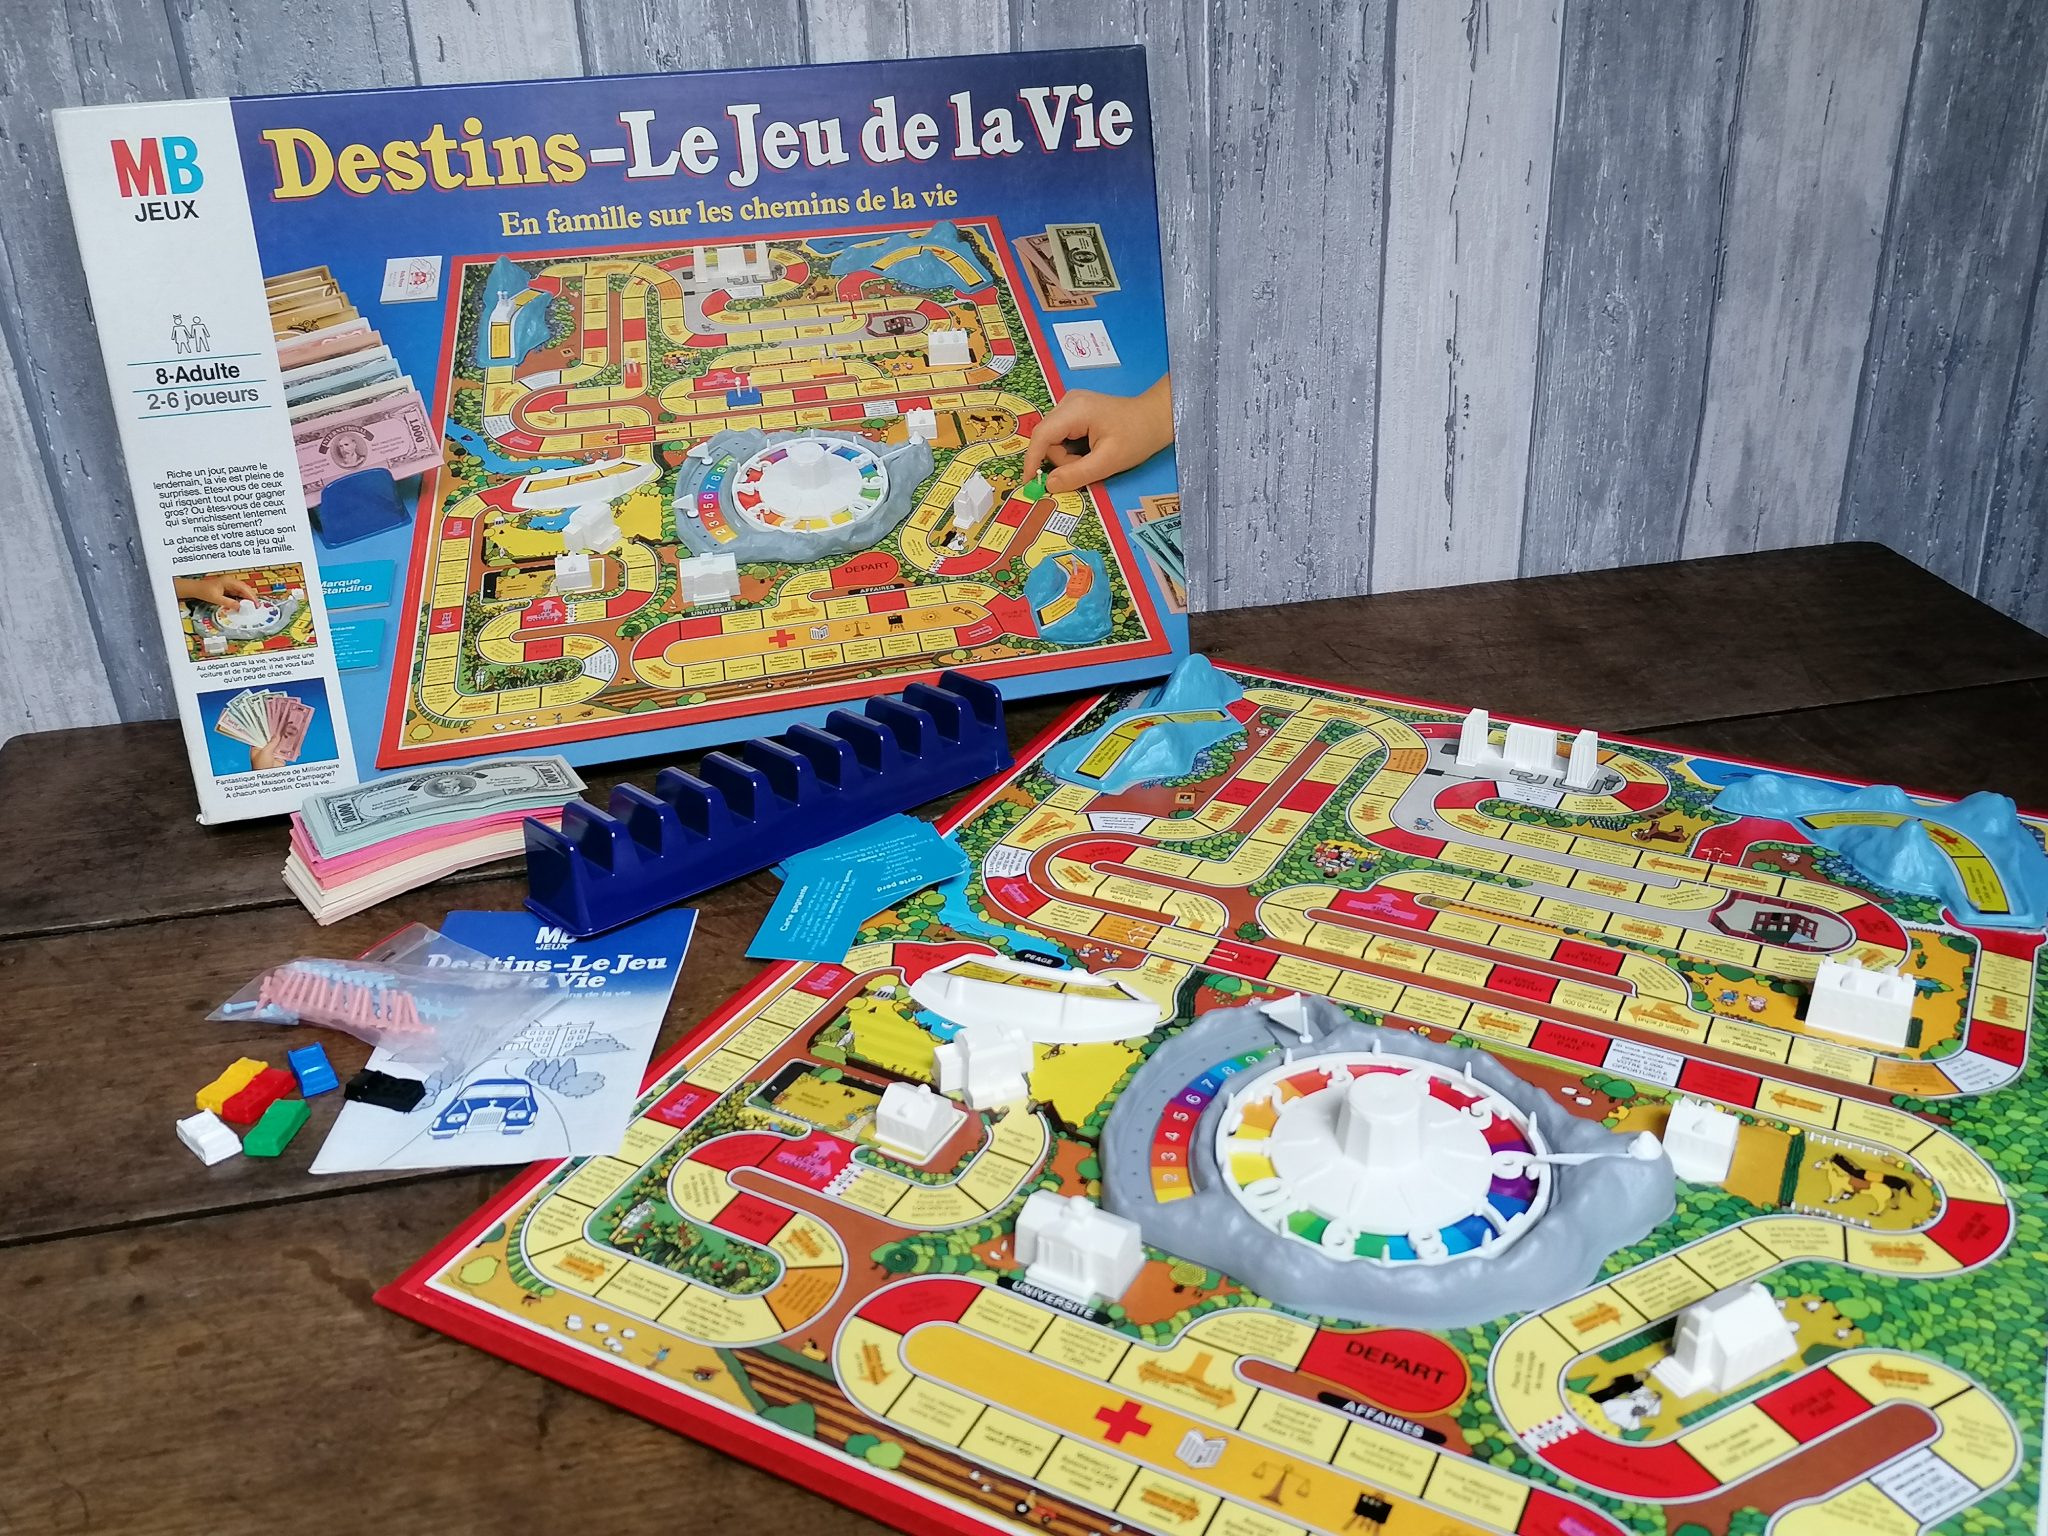 others//582/gameàflife french game.jpg